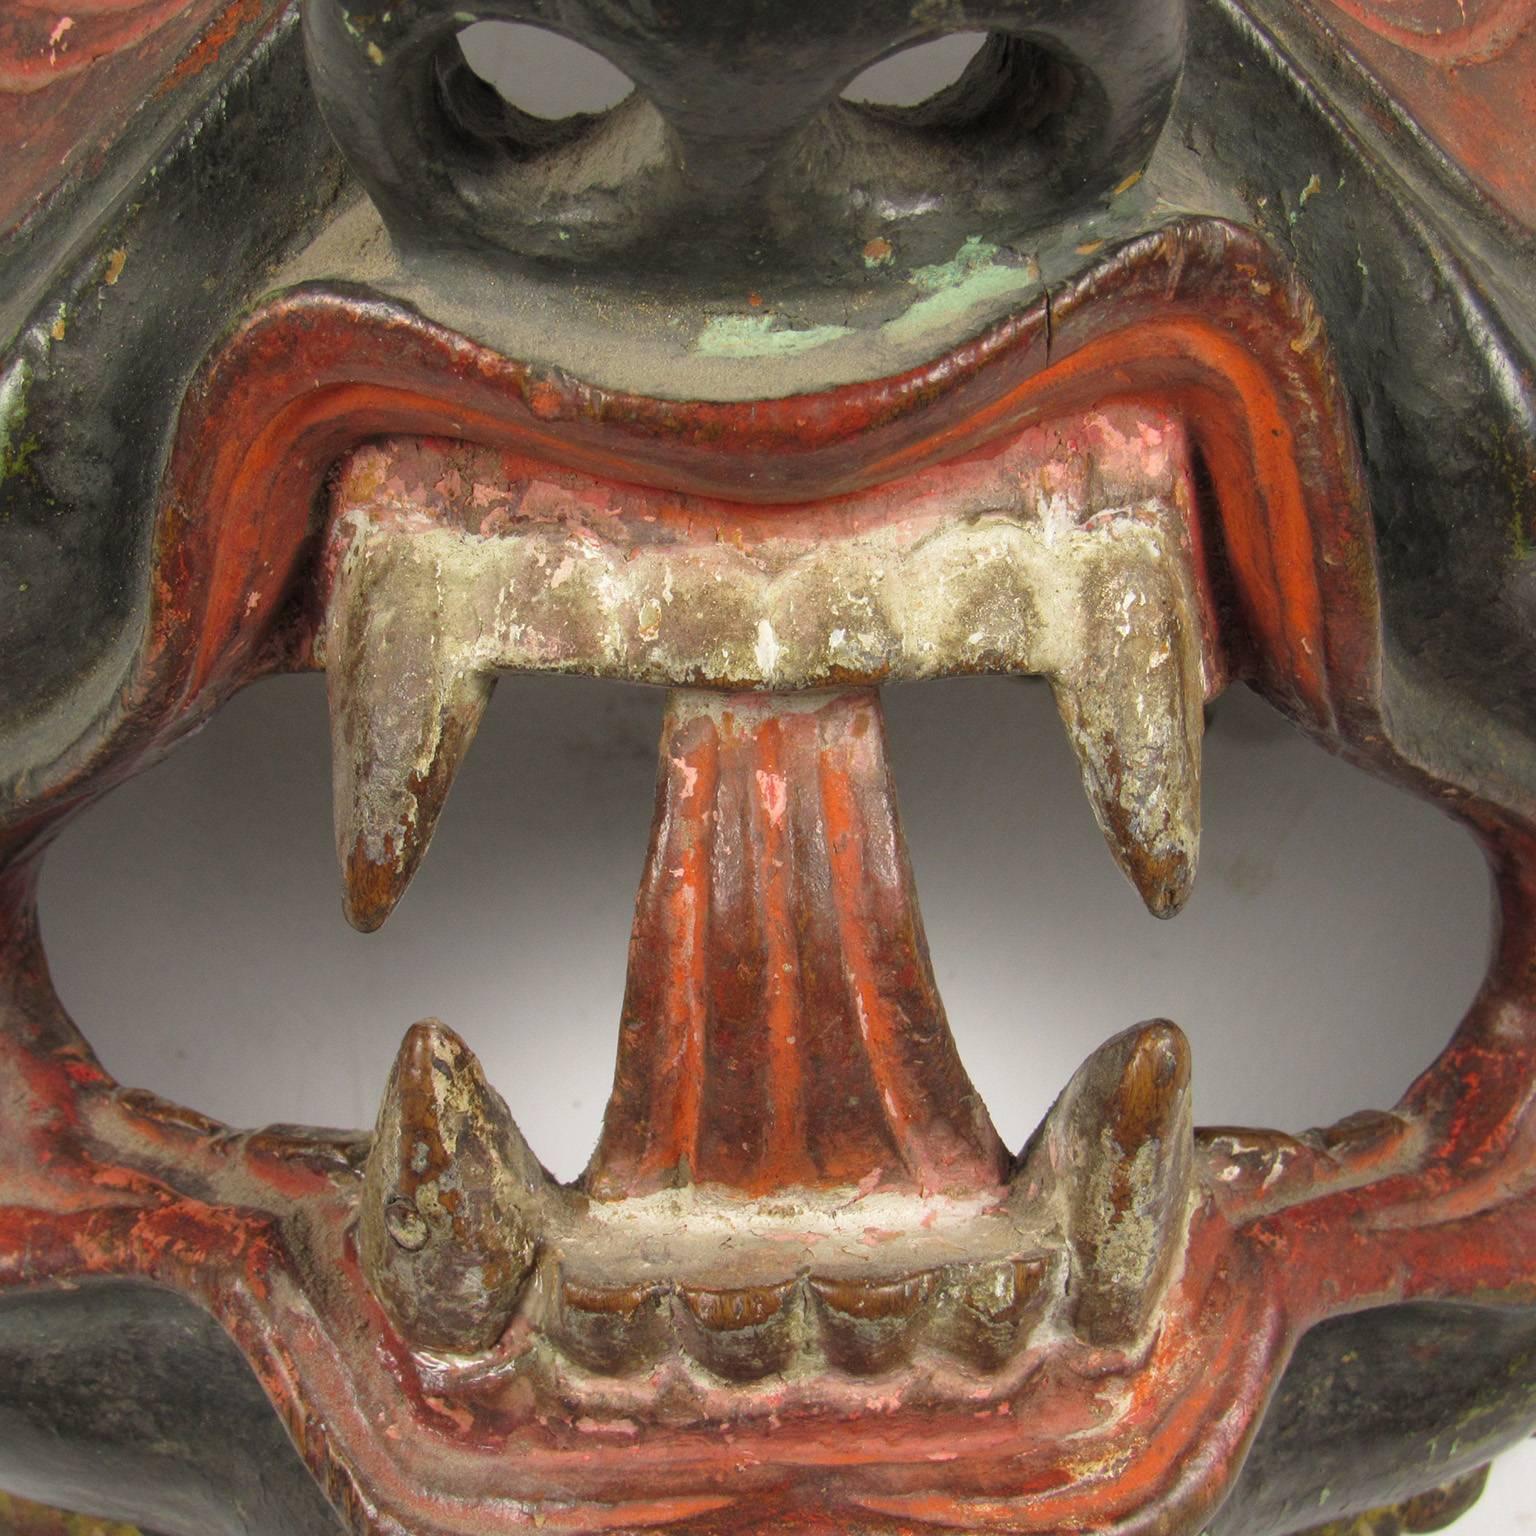 19th Century Late 19th-Early 20th Century Nepalese Carved and Polychromed Wood Mask